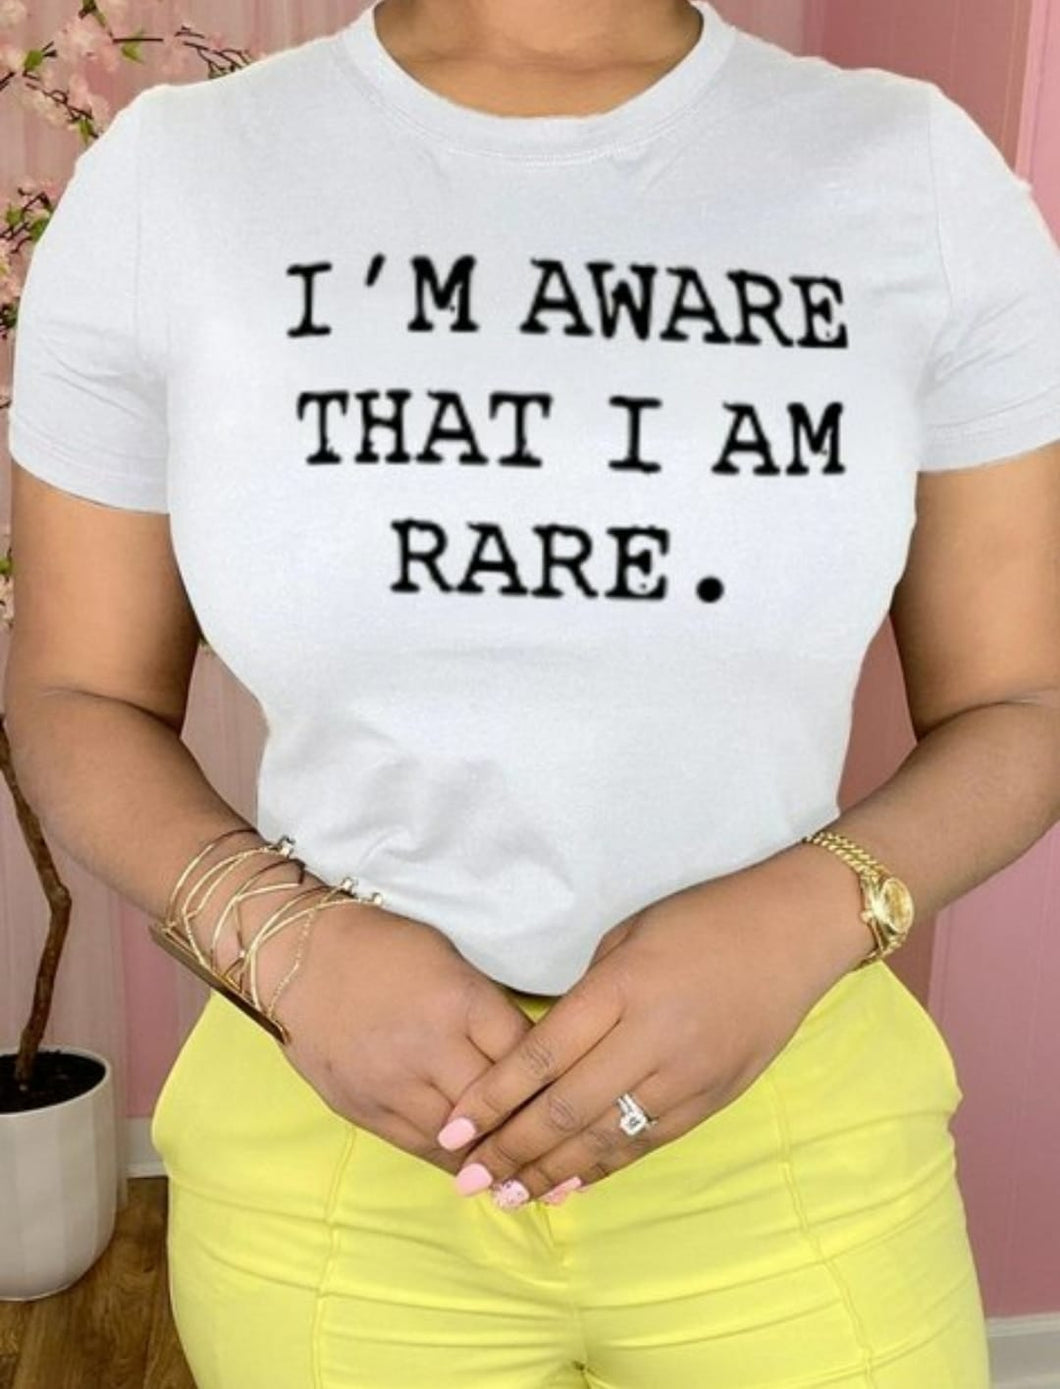 This is a must in your wardrobe! Our I'm Aware That I'm Rare Top has plenty of confidence and is a statement piece. Has a crew neck, short sleeves, loose fitting and soft fabric. Style it with your favorite jeans and high heels for an elevated casual look.